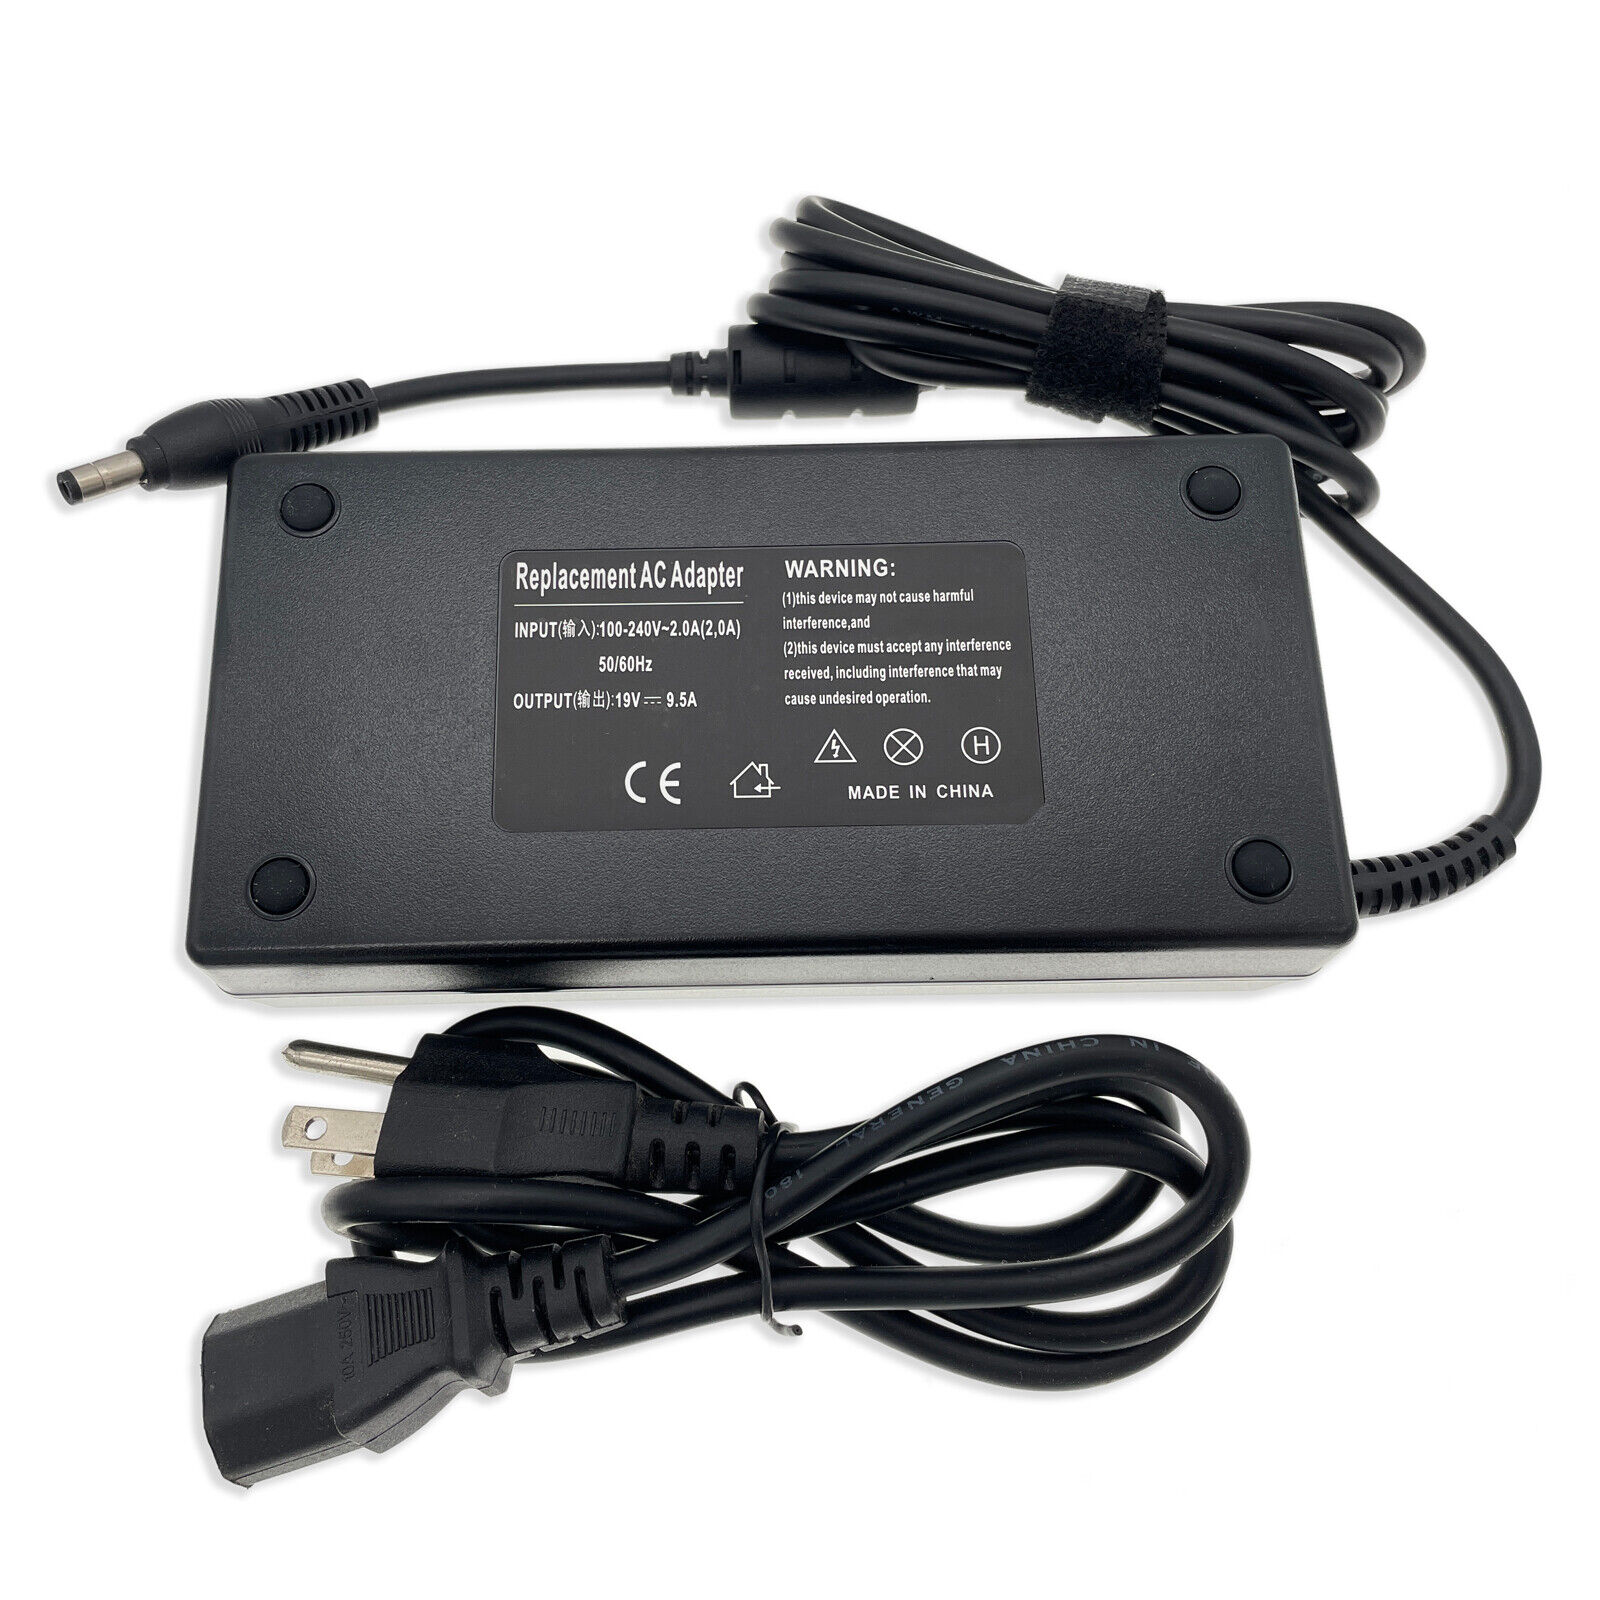 180W 19V 9.5A AC Adapter Charger Power for MSI GT60 GT70 Notebook ADP-180EB D